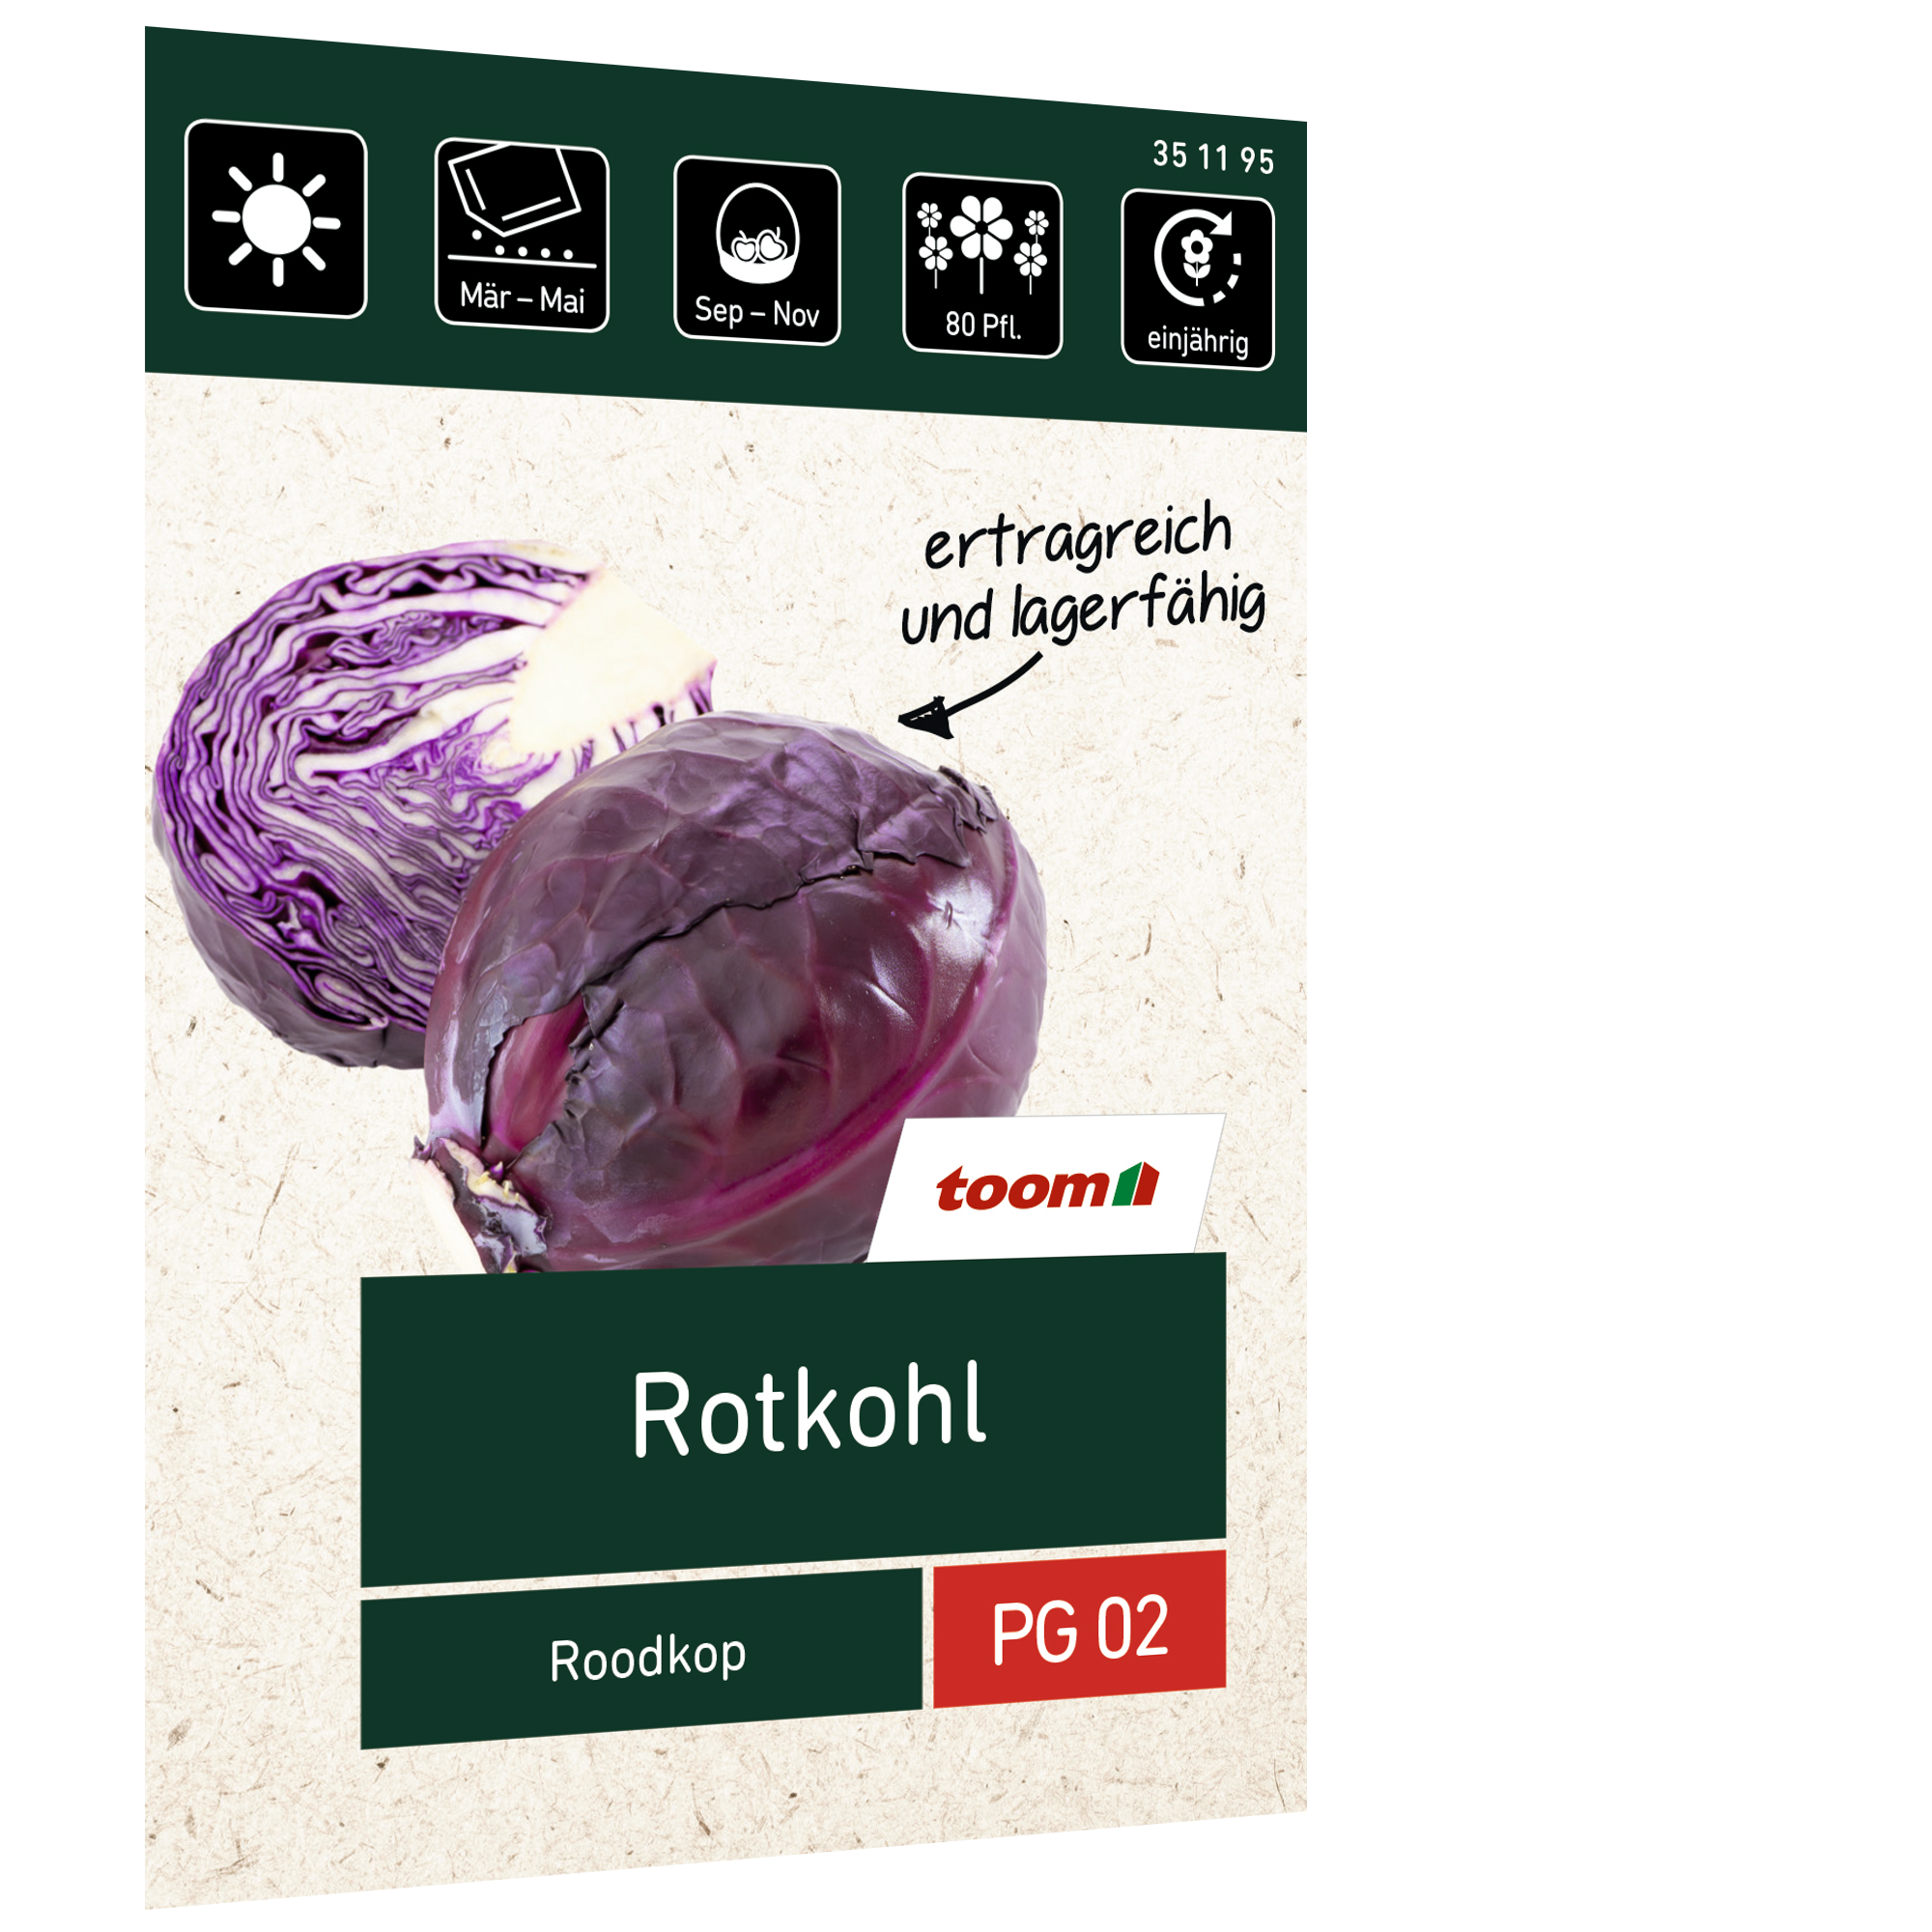 Rotkohl 'Roodkop' + product picture